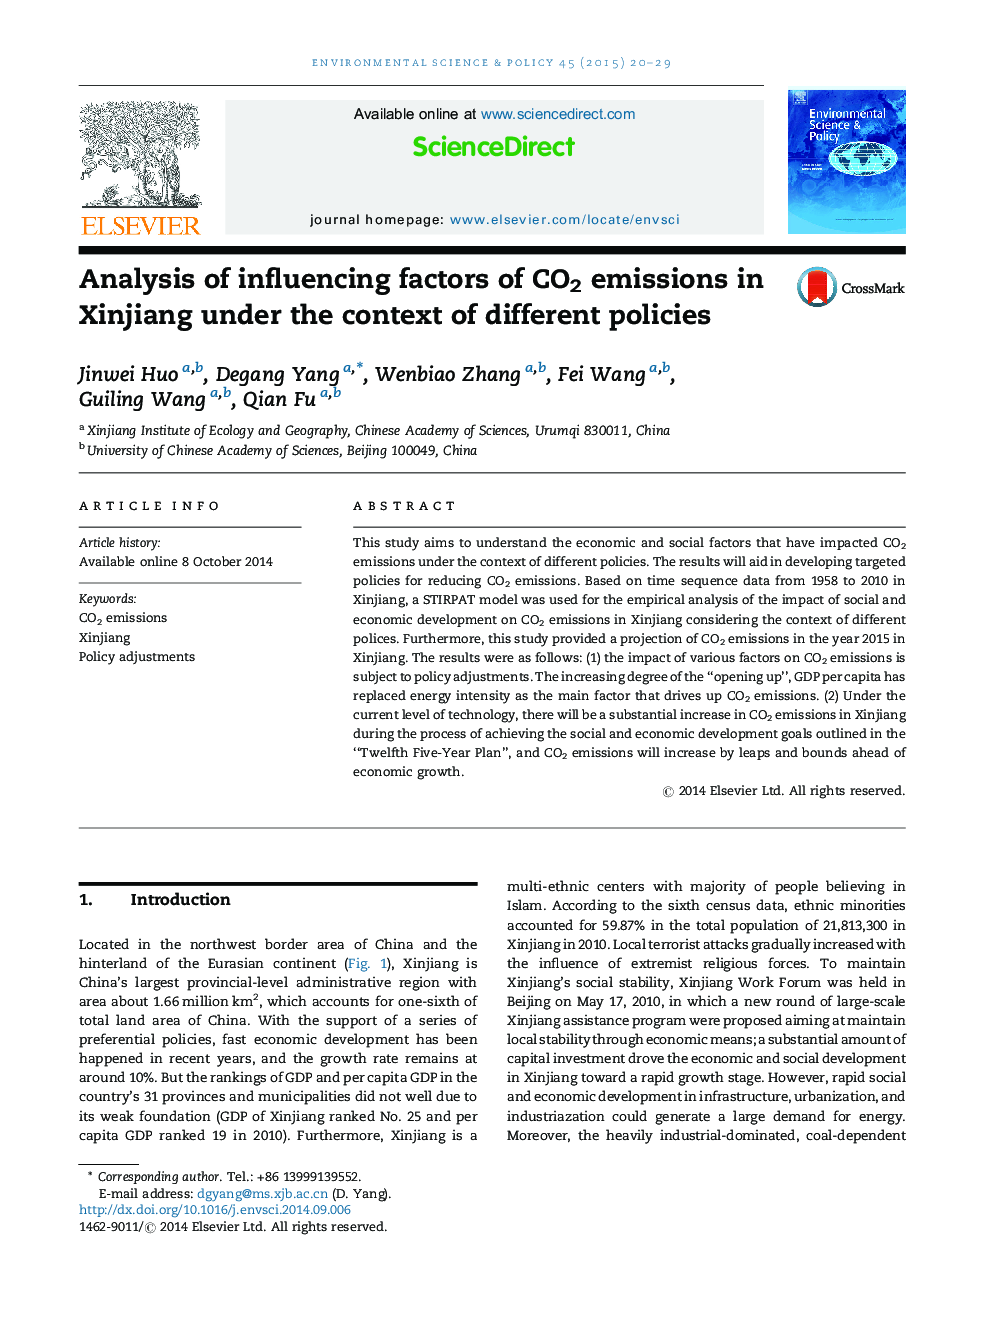 Analysis of influencing factors of CO2 emissions in Xinjiang under the context of different policies